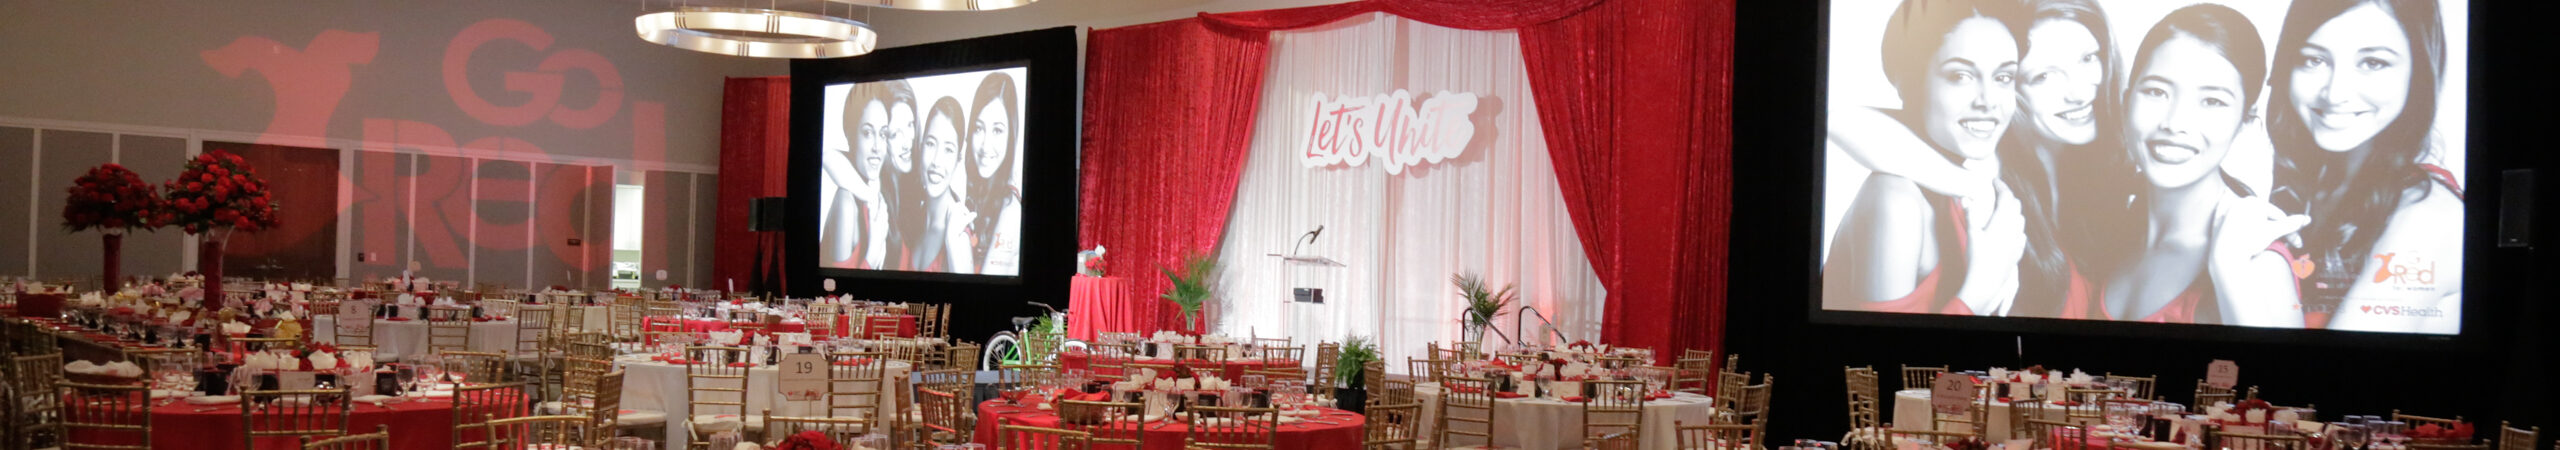 American Heart Association Go Red for Women Luncheon